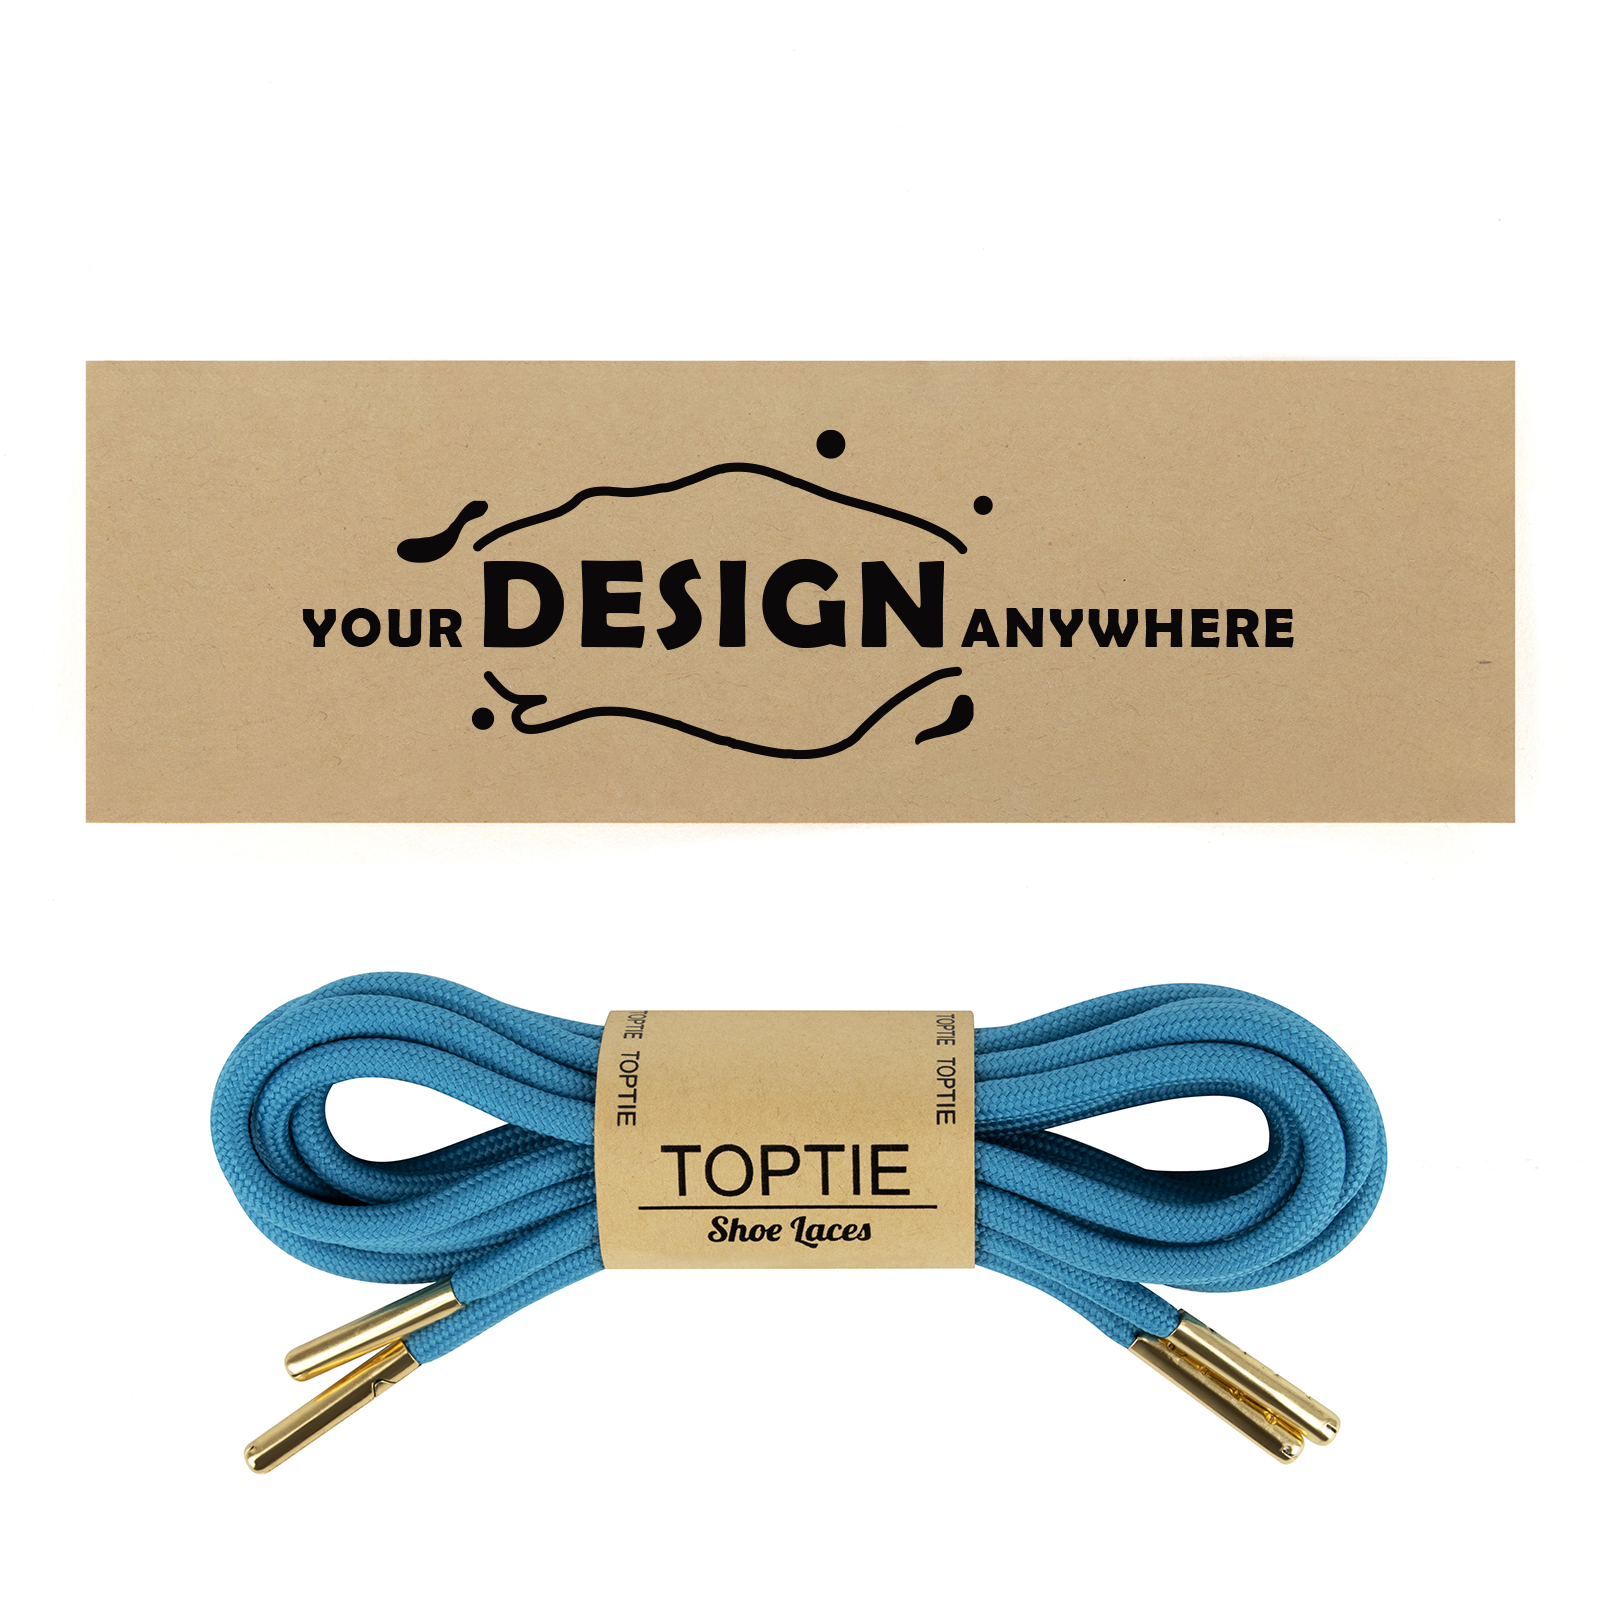 Paper Tag Labels - Get a personalised Paper tag or label design print